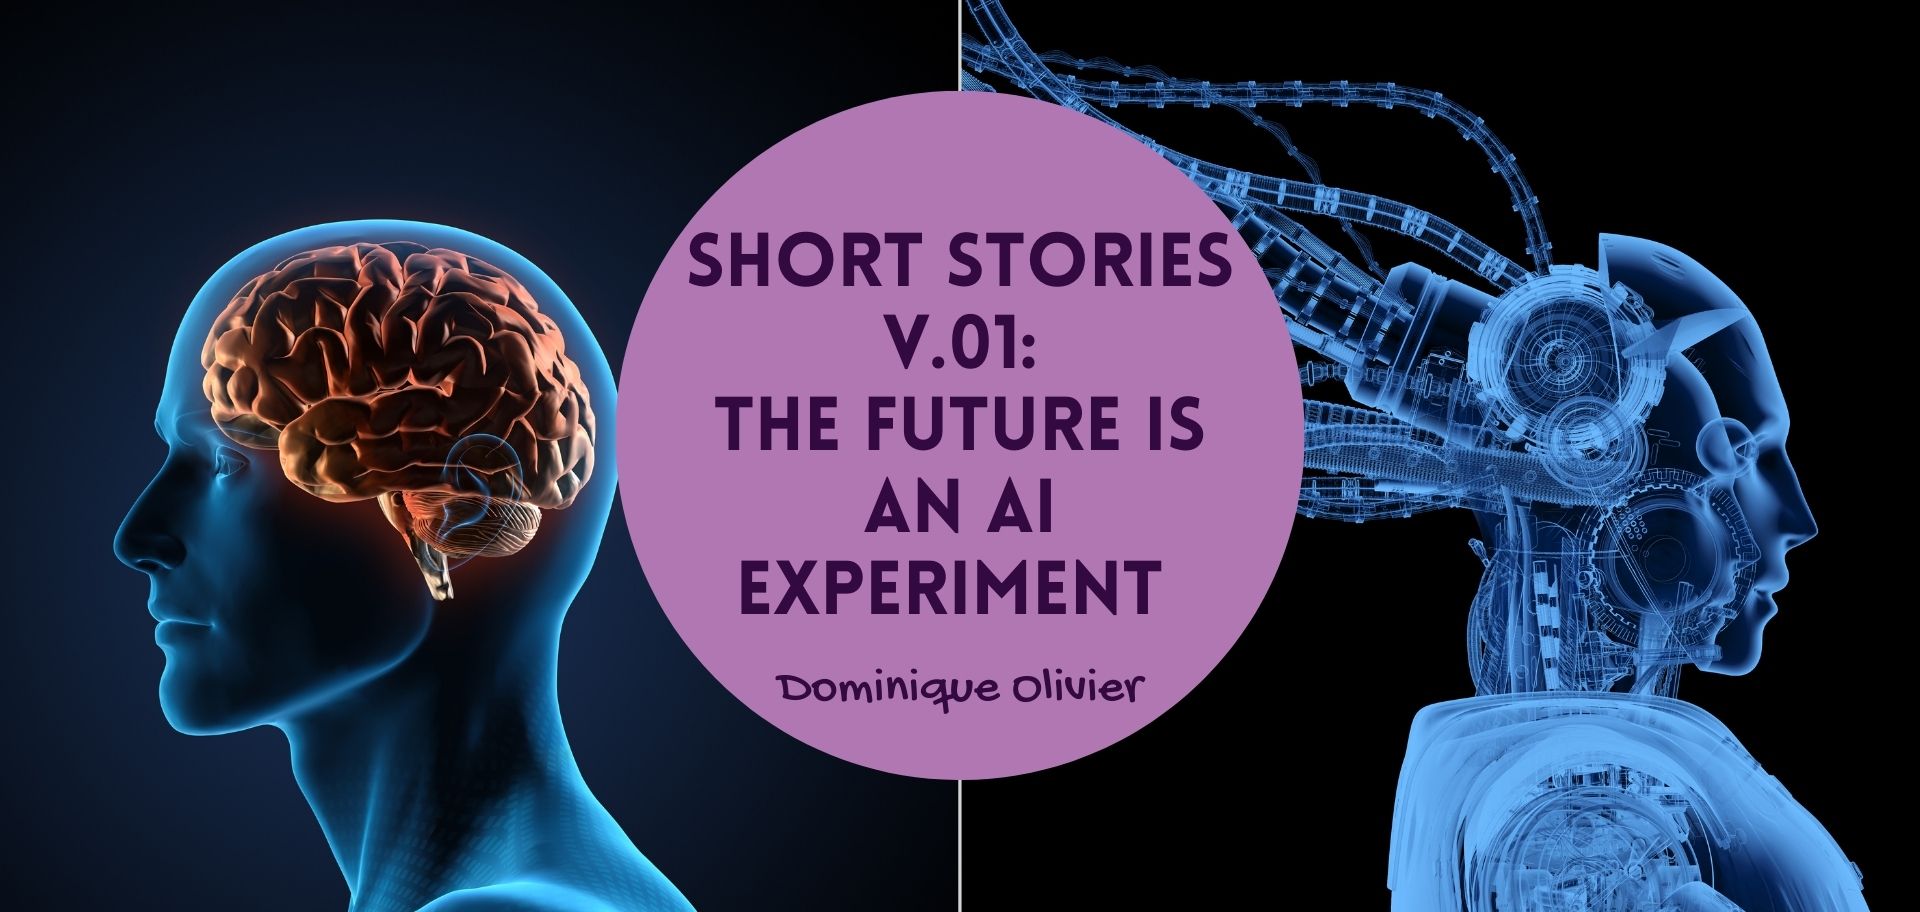 Short stories v.01: The future is an AI experiment